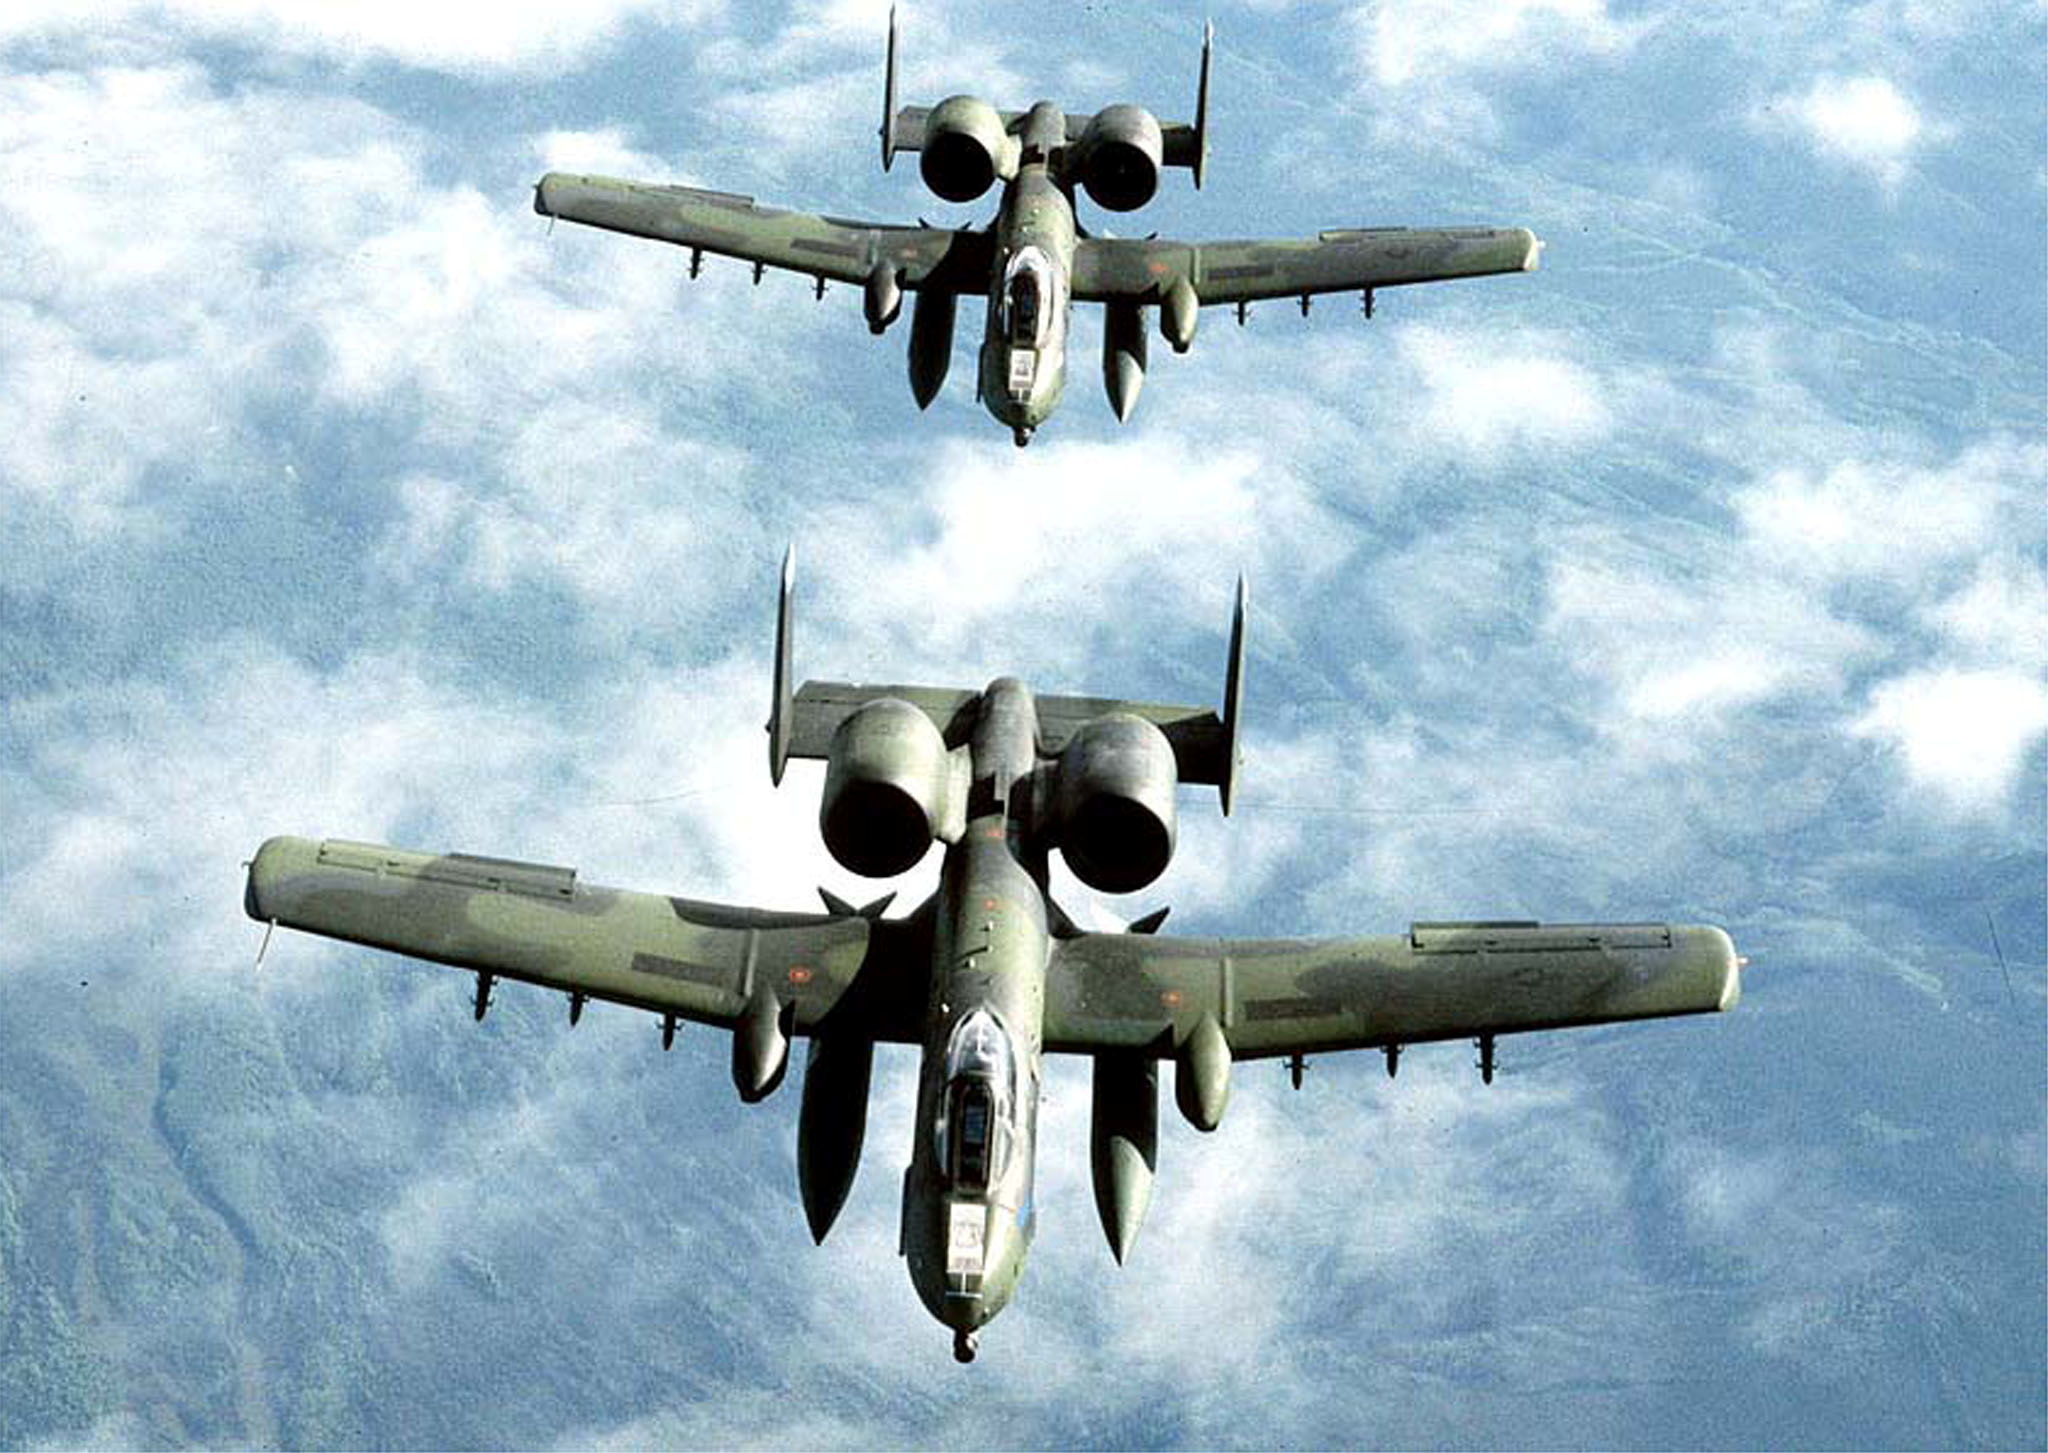 FILE PHOTO OF US AIR FORCE A 10 TANKBUSTER JETS.